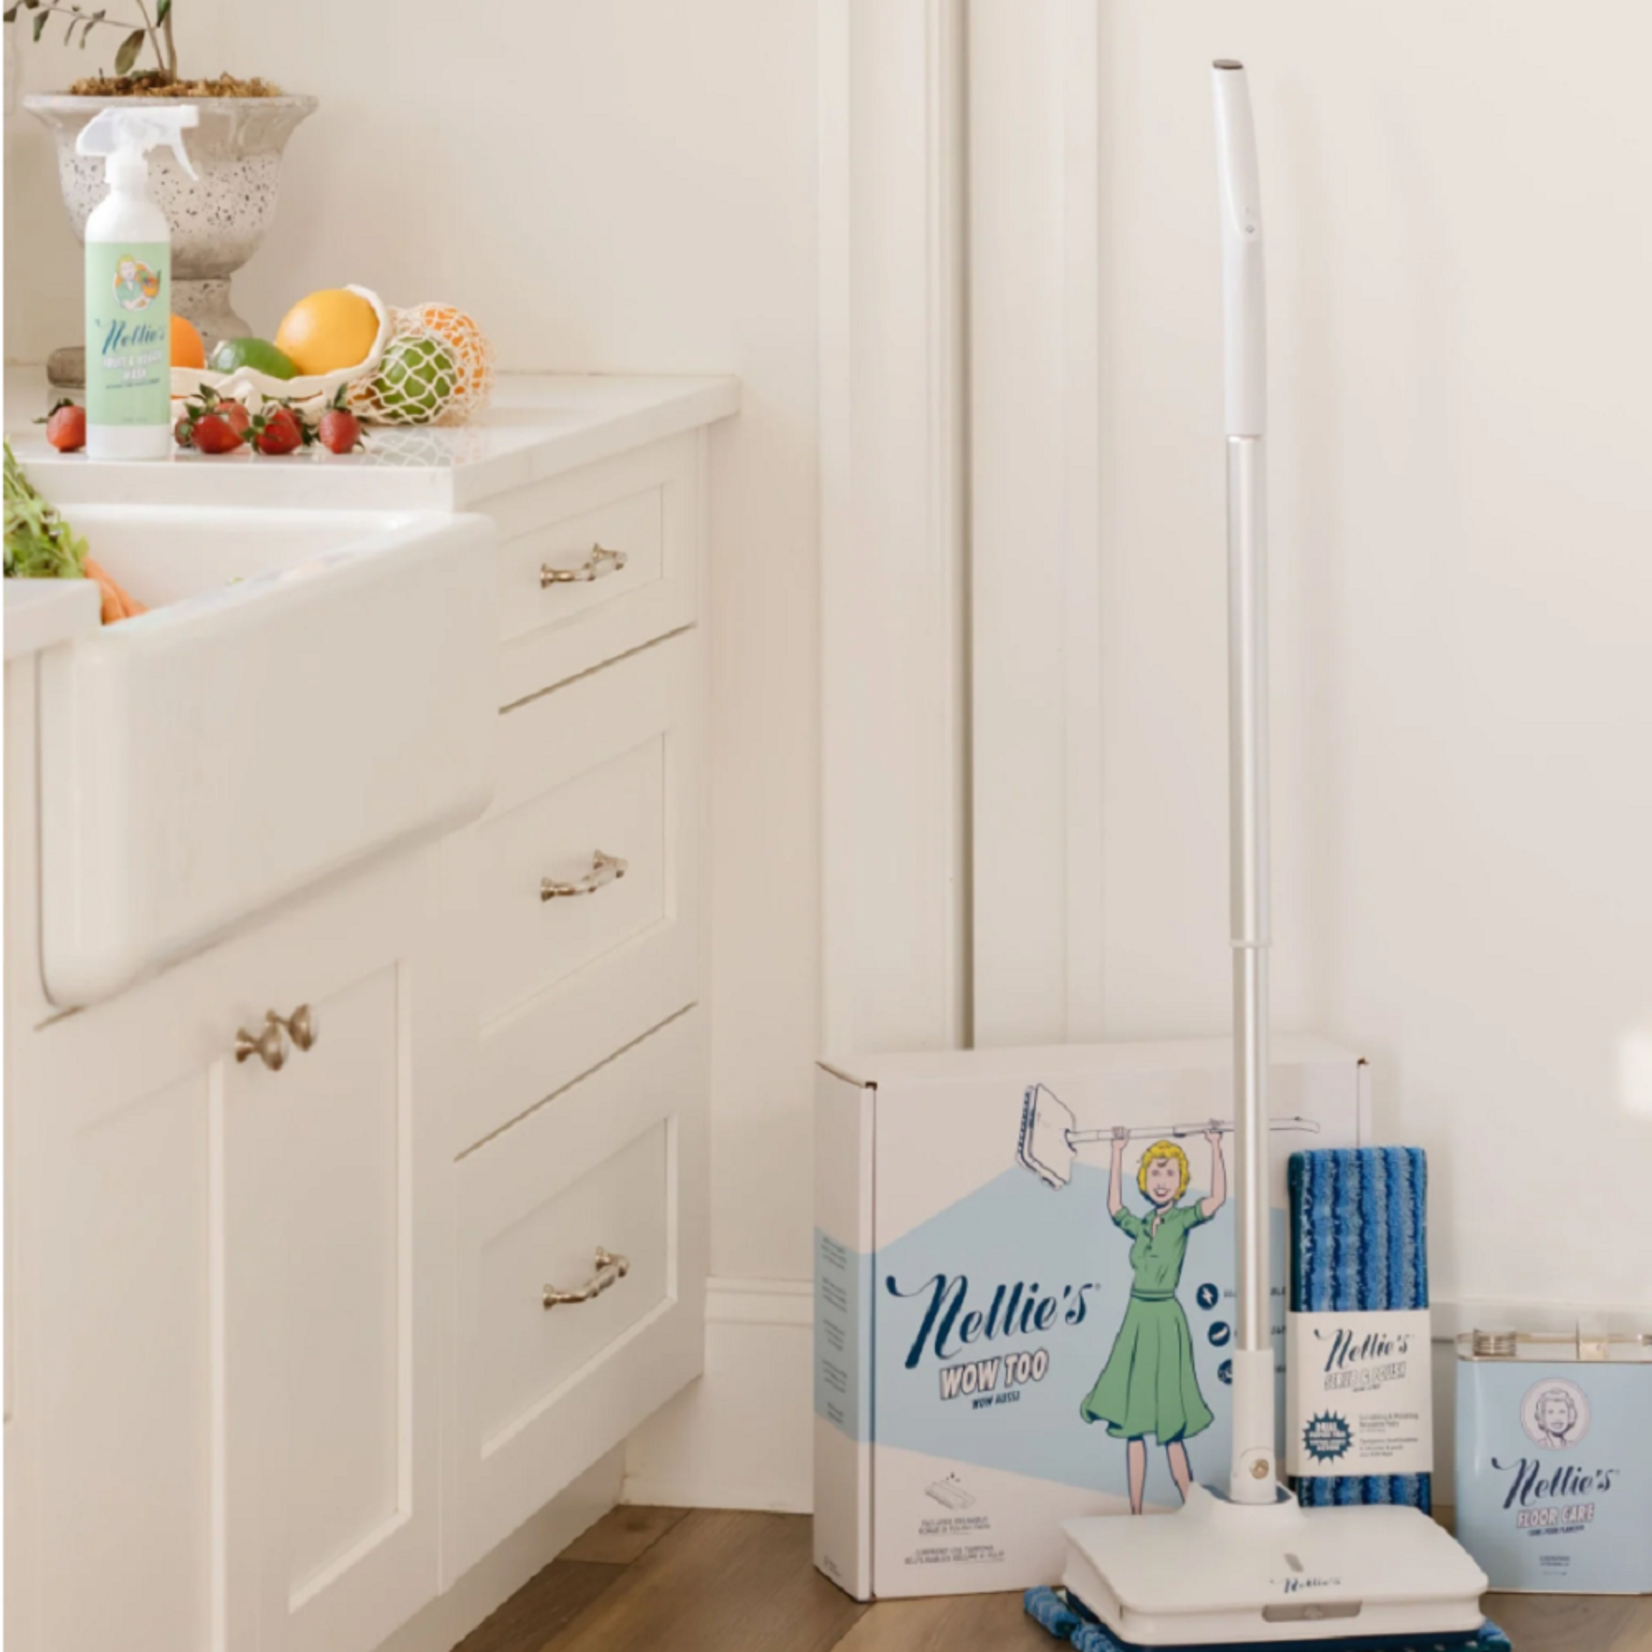 Nellie's Nellie's Wow Too Cordless Electric Mop